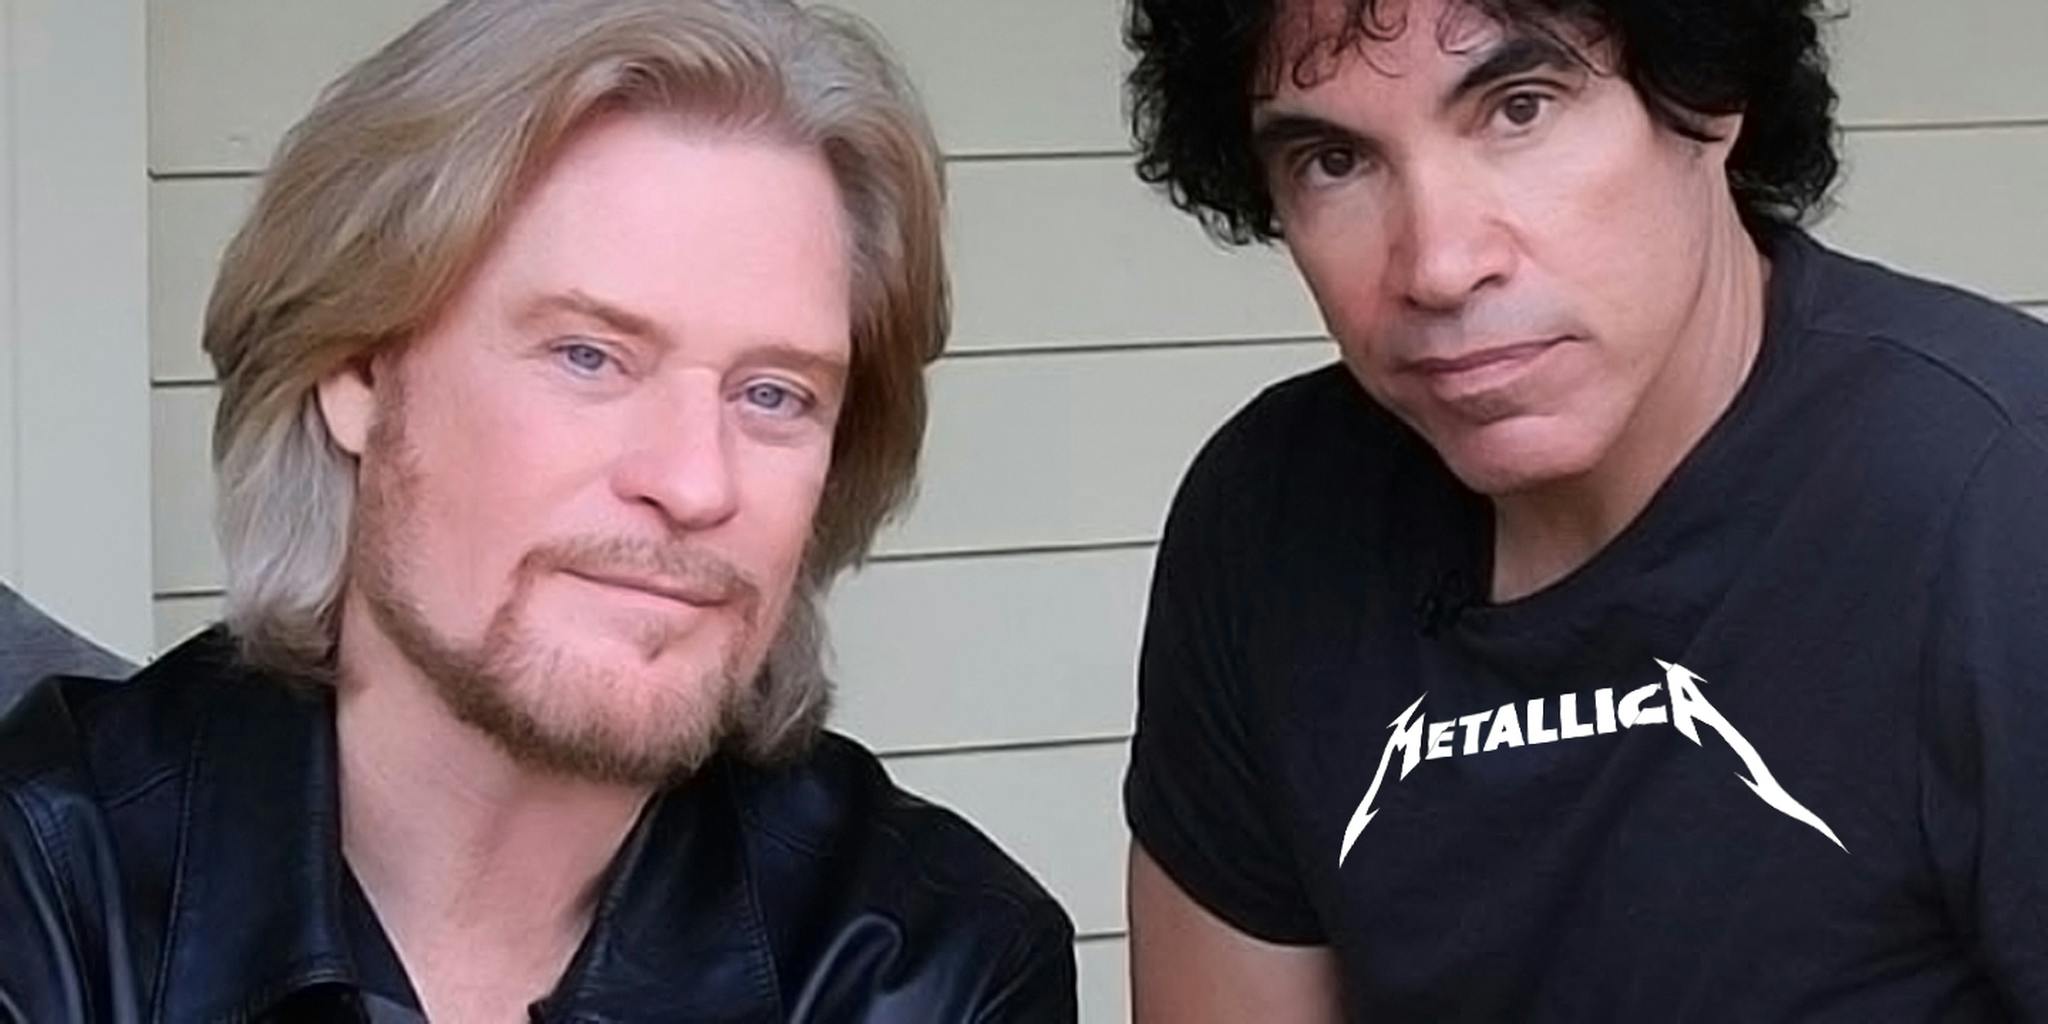 Hall oates out of touch. Daryl Hall & John oates. Группа Hall & oates. Hall & oates. John oates.